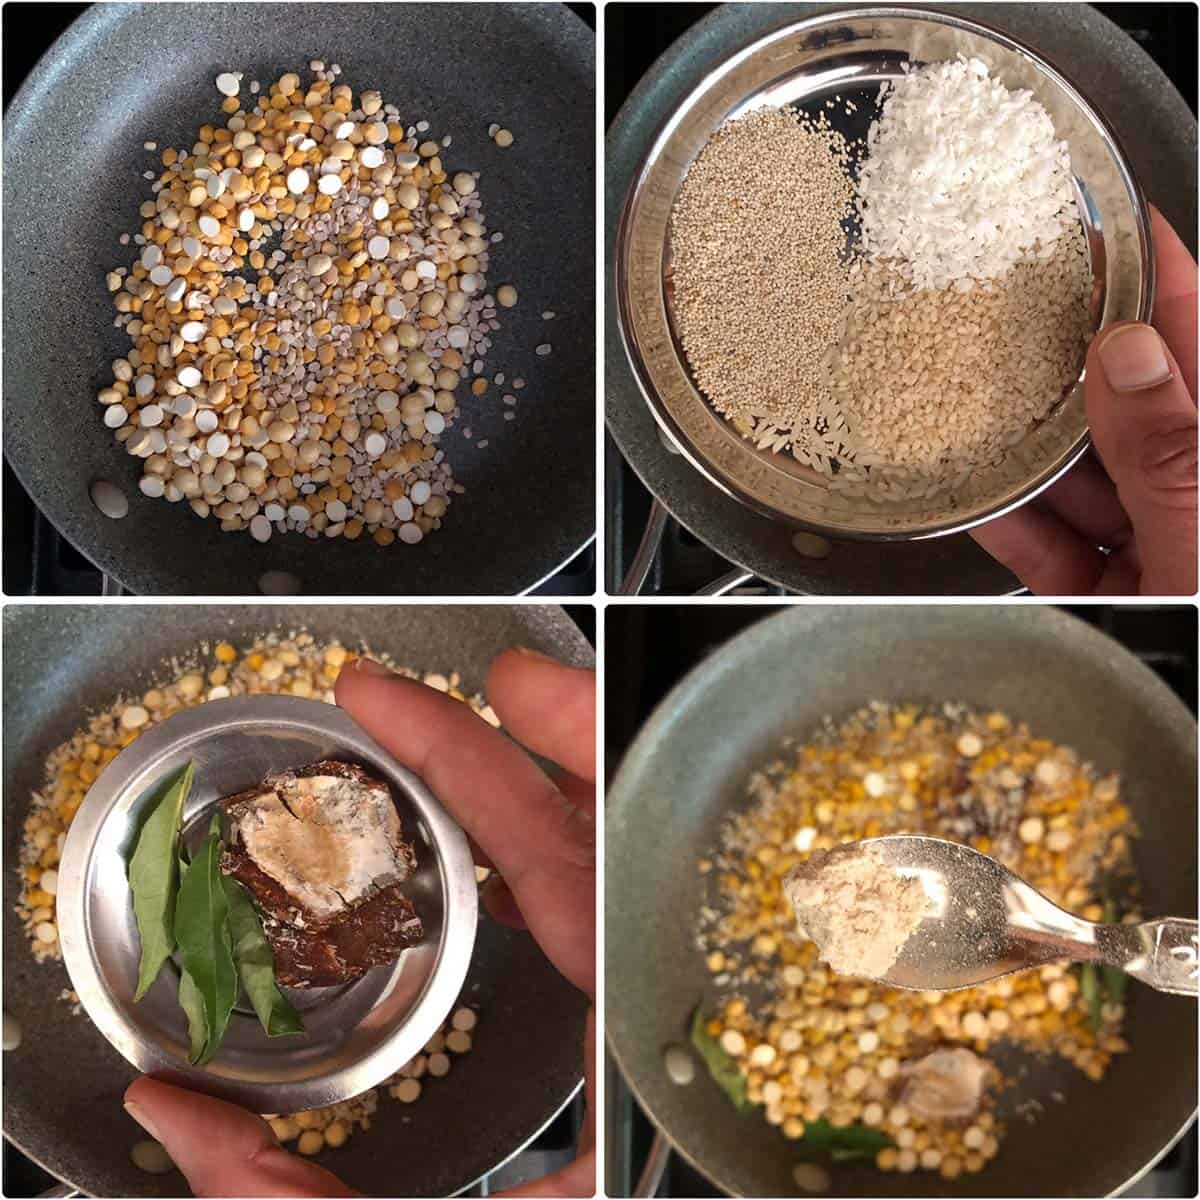 4 panel photo showing the sautéing of lentils and spices.